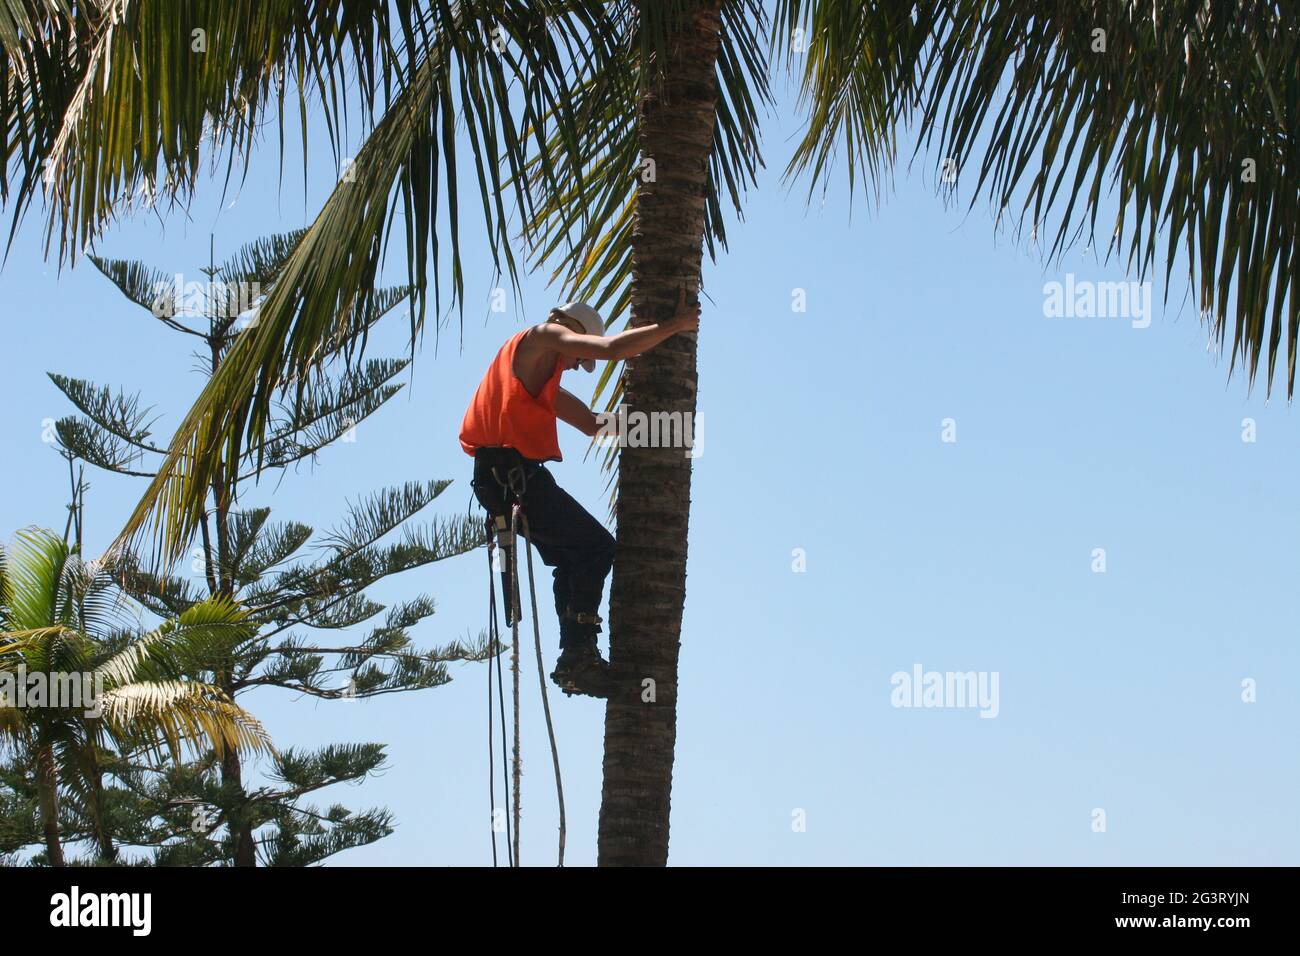 coconut palm (Cocos nucifera), worker climbing a coconut tree with safety equipment, Australia, Queensland Stock Photo